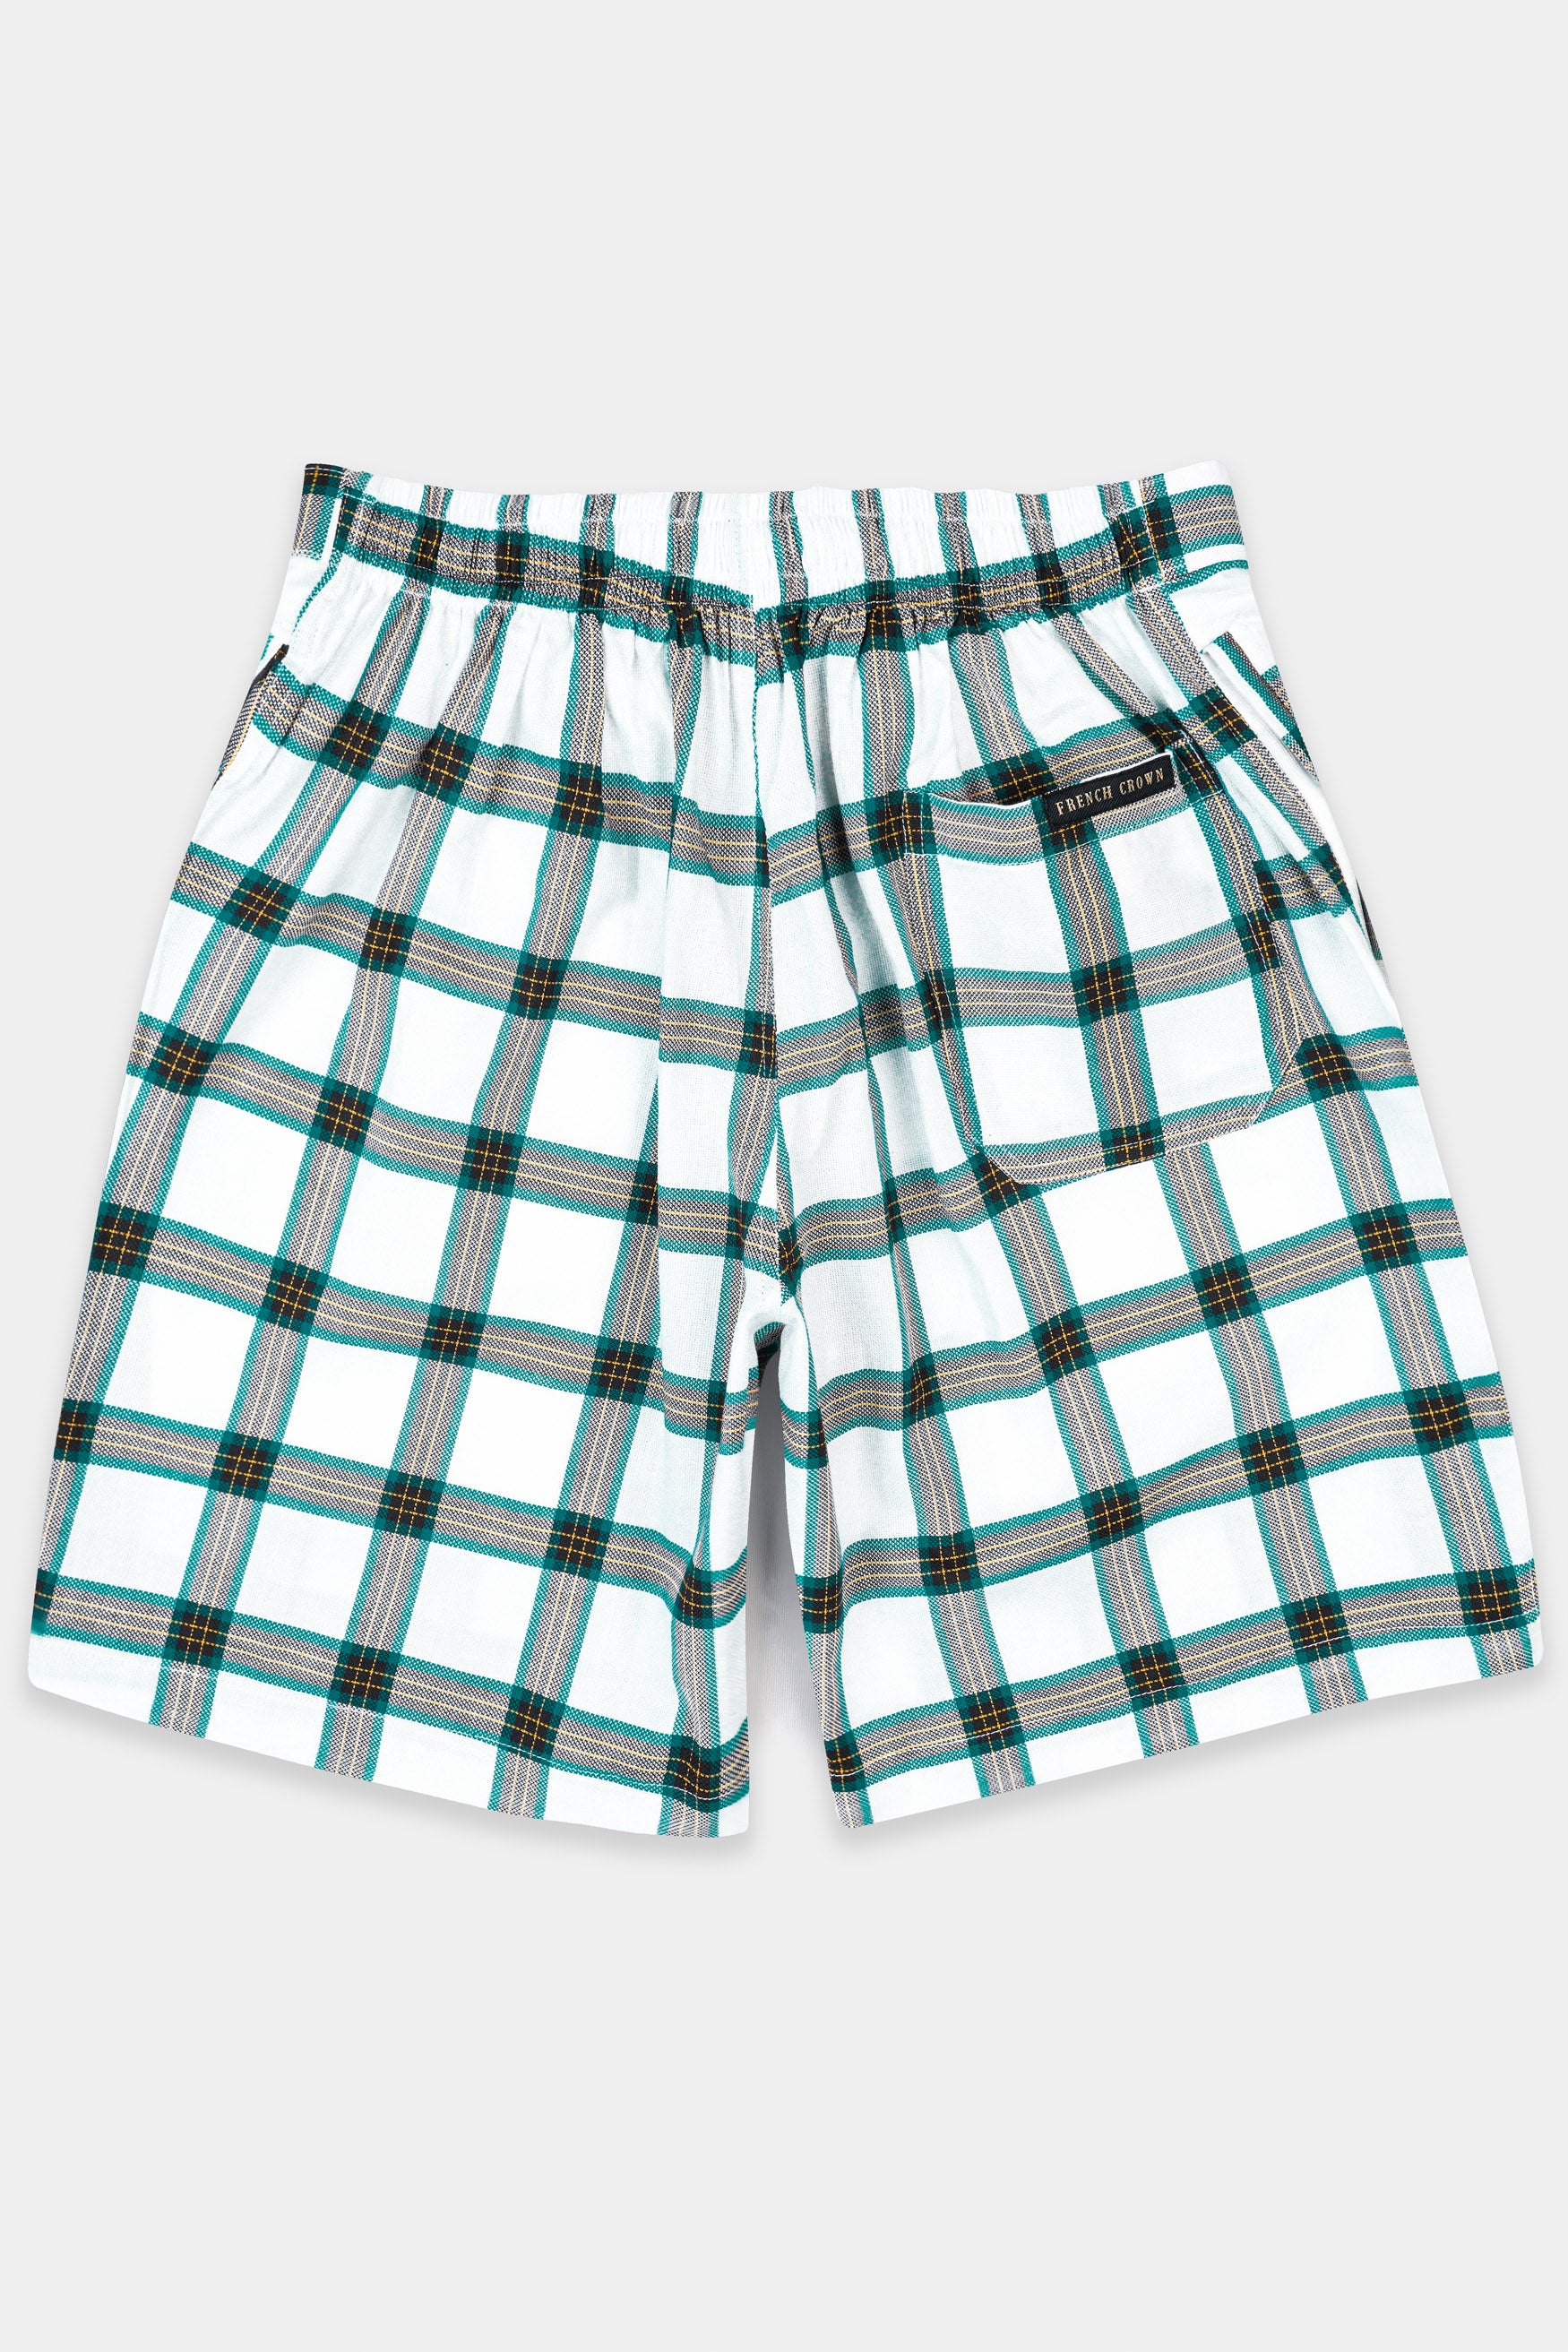 Bright White with Teal Blue Checkered Dobby Textured Giza Cotton Shorts SR360-28, SR360-30, SR360-32, SR360-34, SR360-36, SR360-38, SR360-40, SR360-42, SR360-44